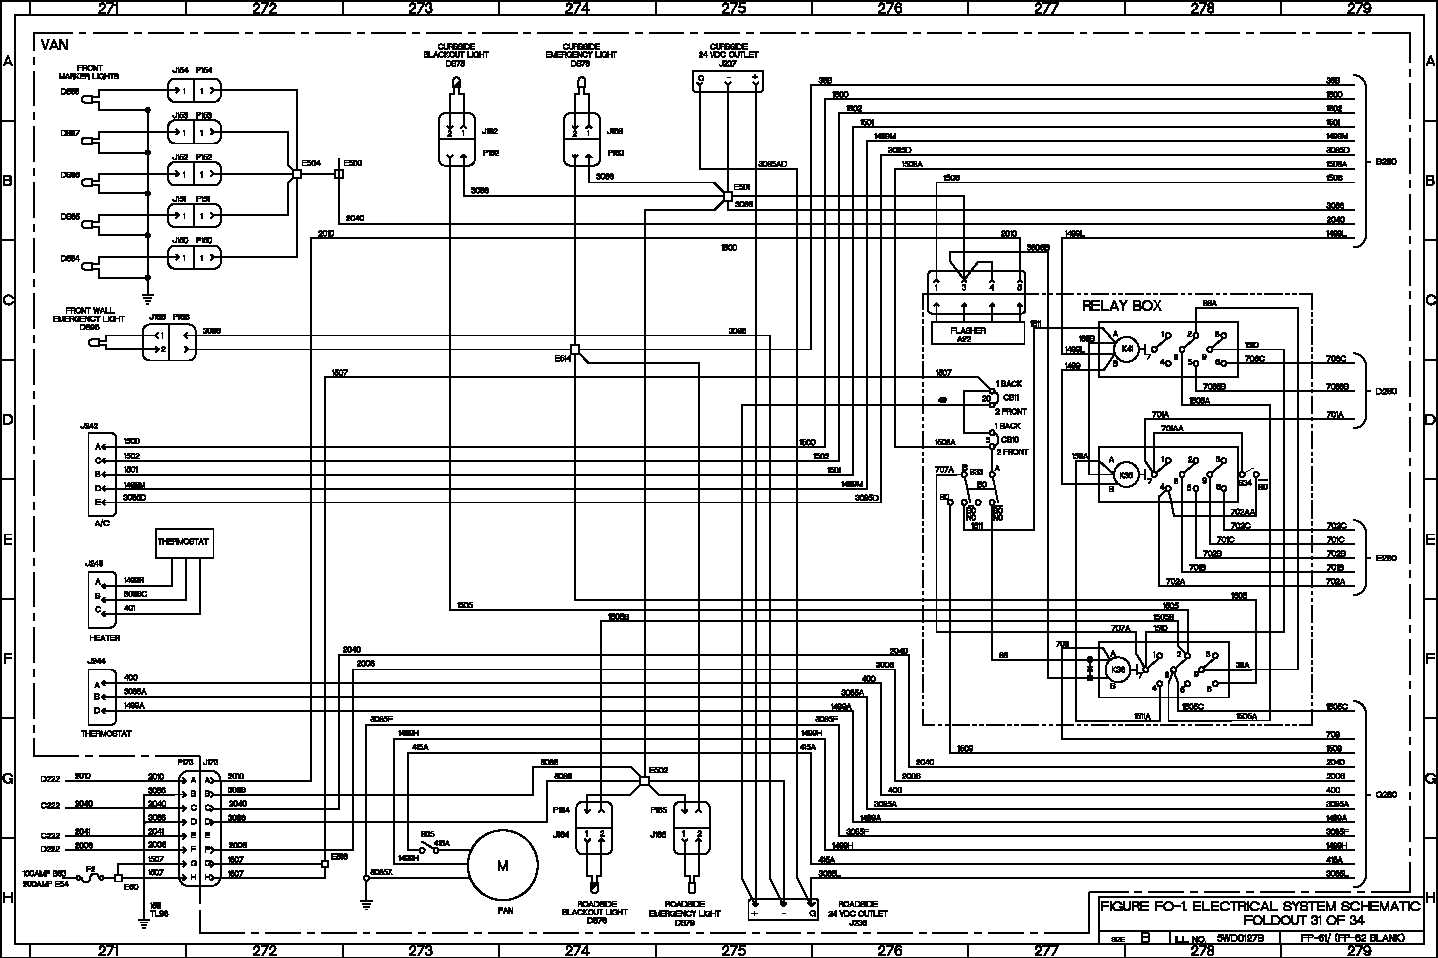 Ab dick 9870 electrical schematic